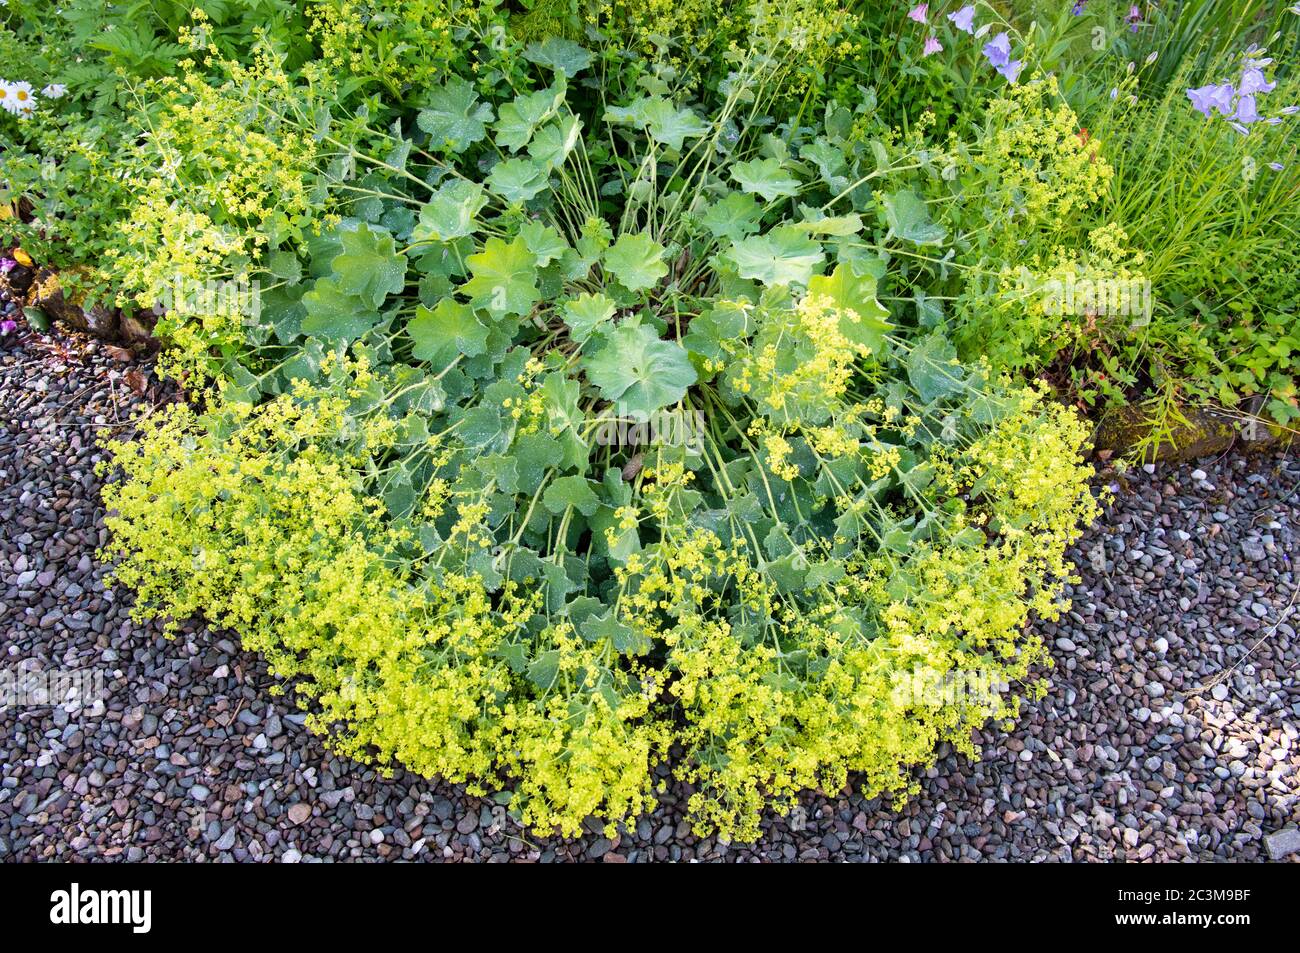 Alchemilla mollis (lady's mantle) plant and flowers flopped over on pebble driveway path after heavy rain, summer, Scotland, UK Stock Photo